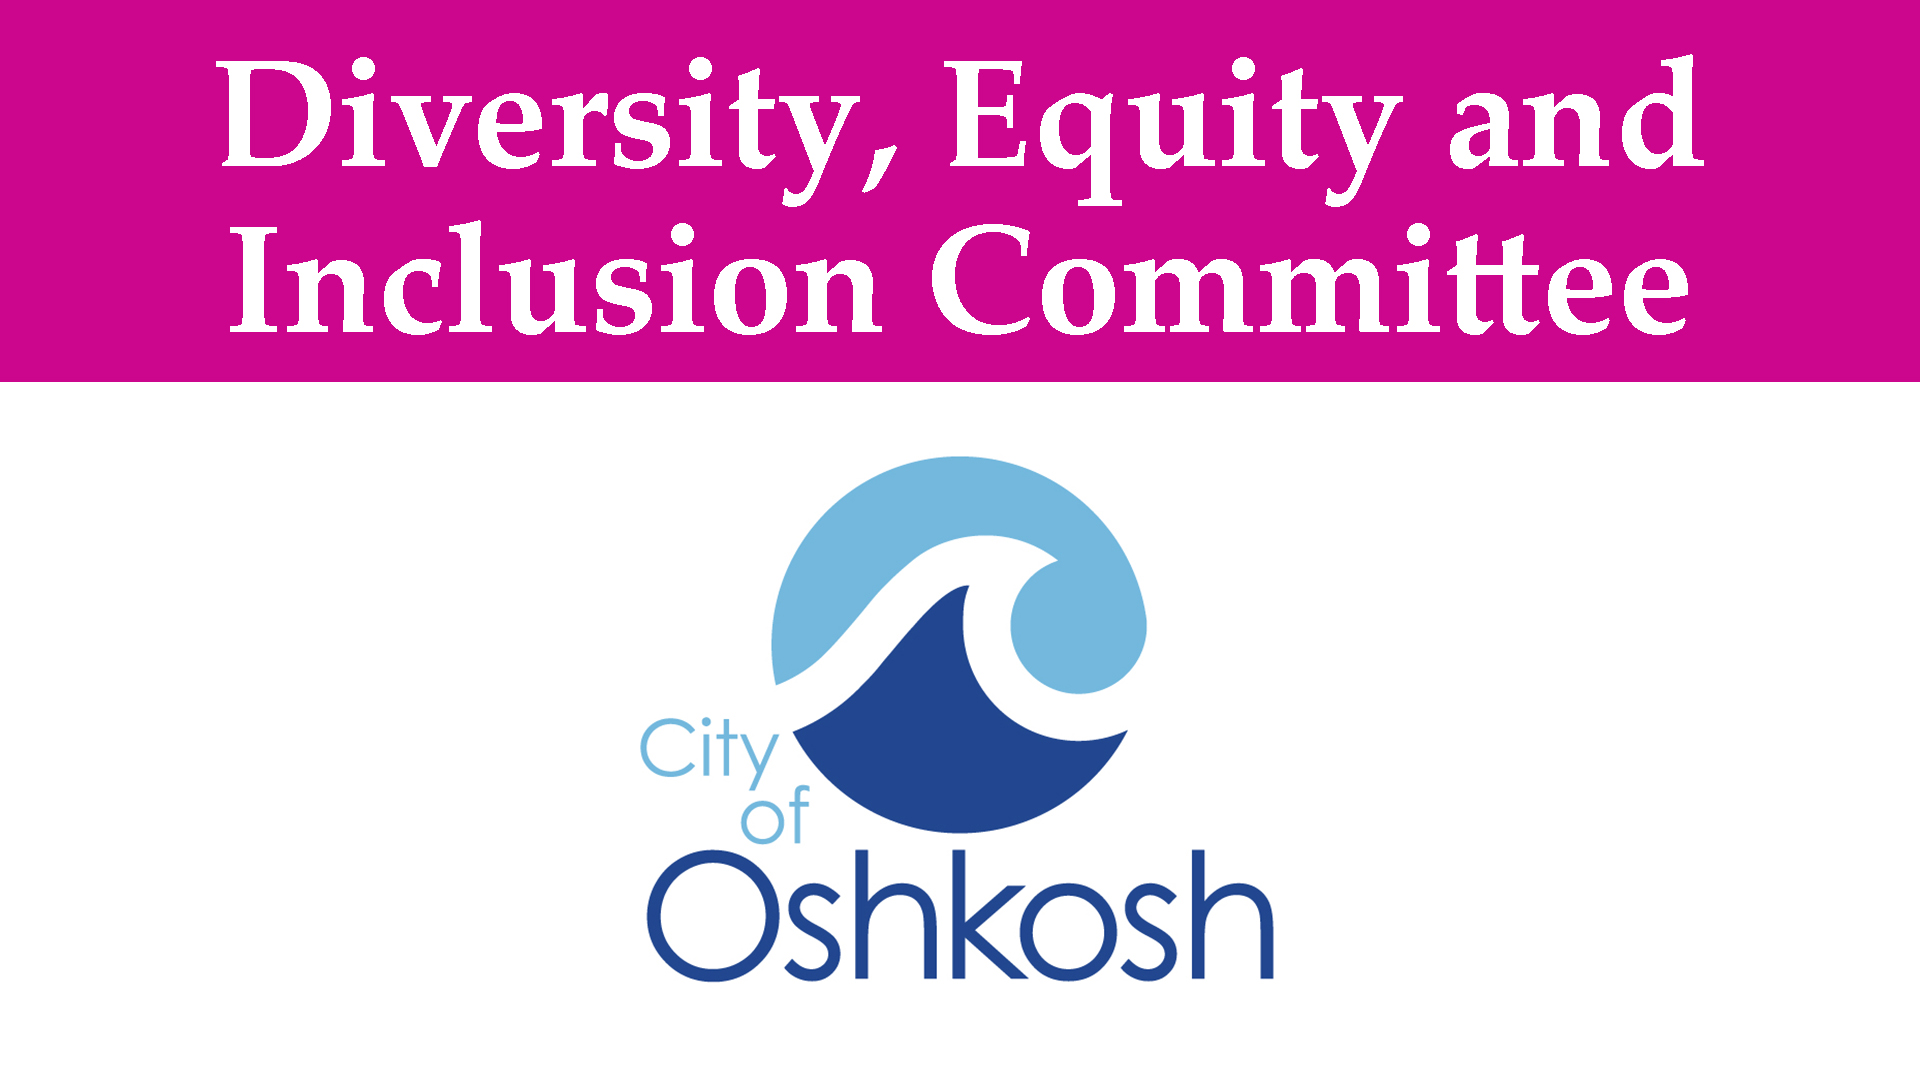 Diversity, Equity and Inclusion Committee